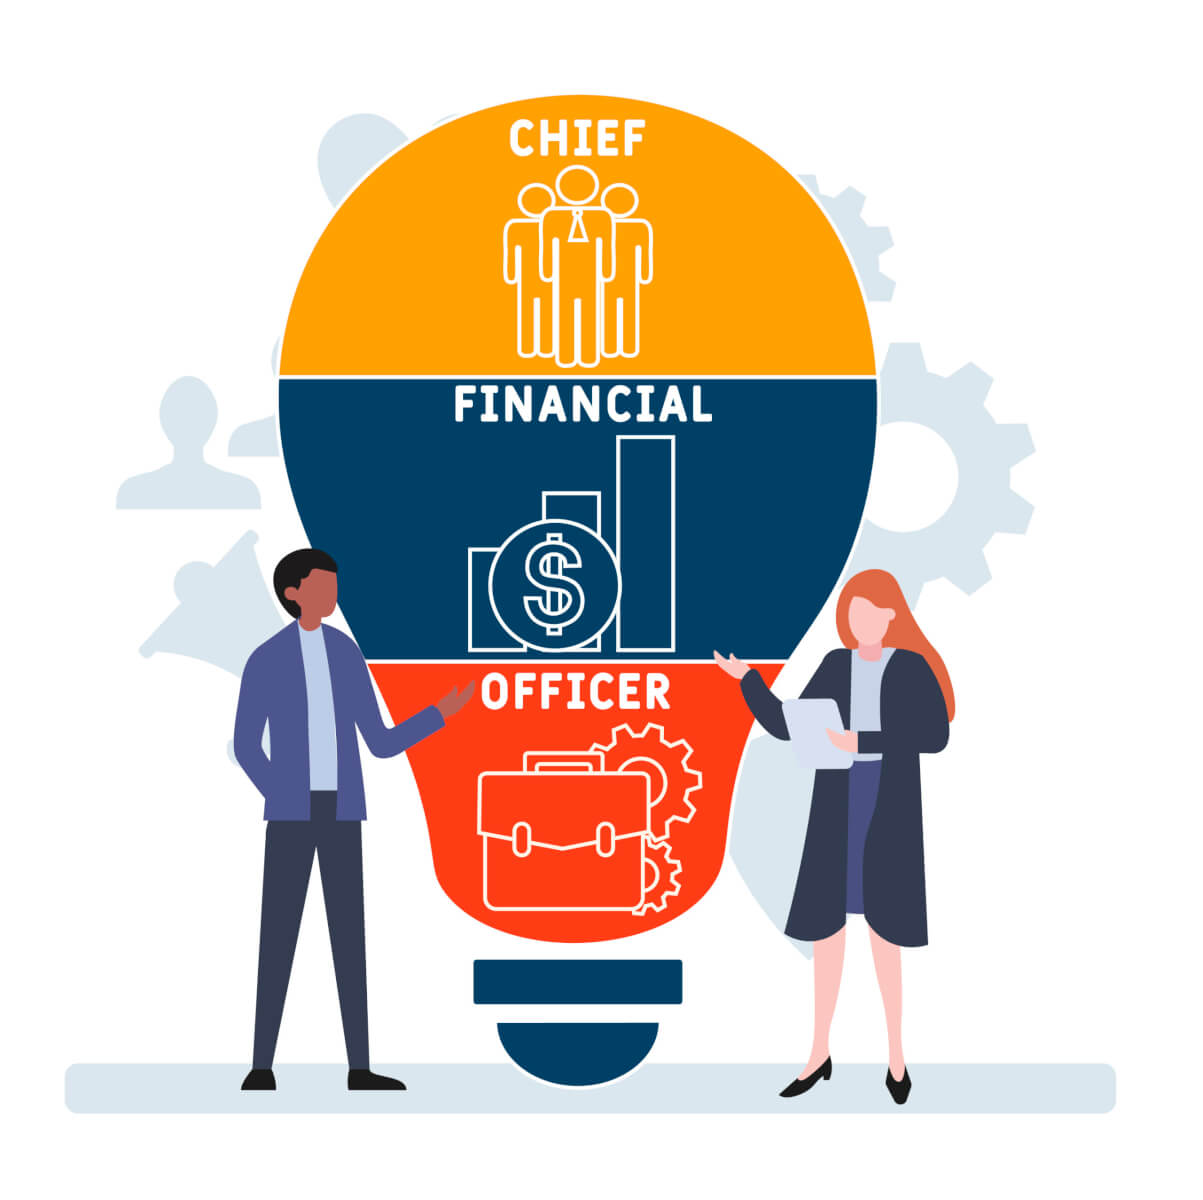 Flat design with people. CFO - Chief Financial Officer company acronym, business concept background. Vector illustration for website banner, marketing materials, business presentation, online advertising.